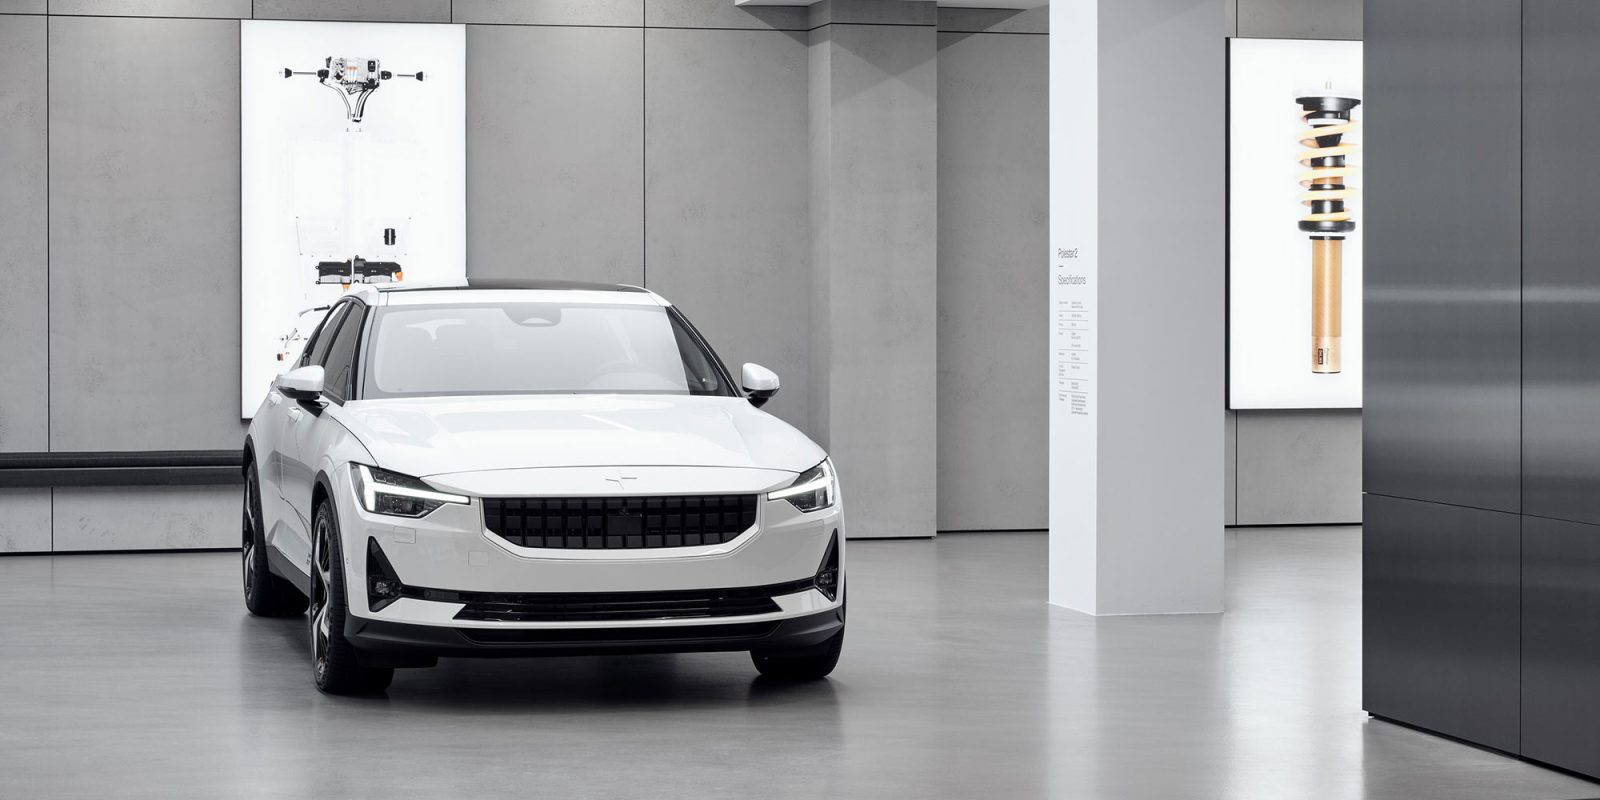 Polestar Takes Over Tesla's Showroom at the Short Hills Mall